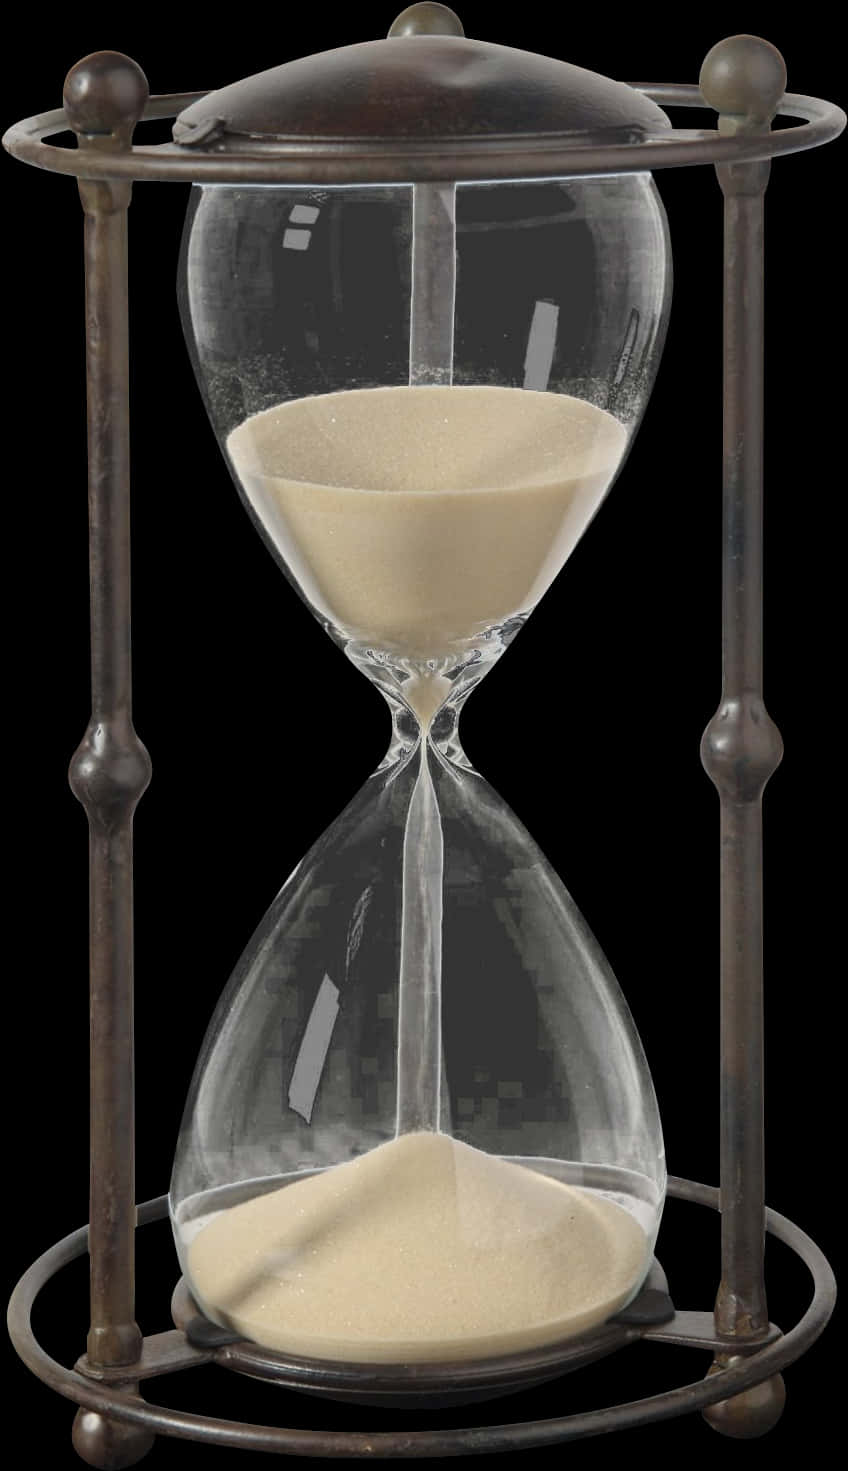 A Close-up Of A Hourglass